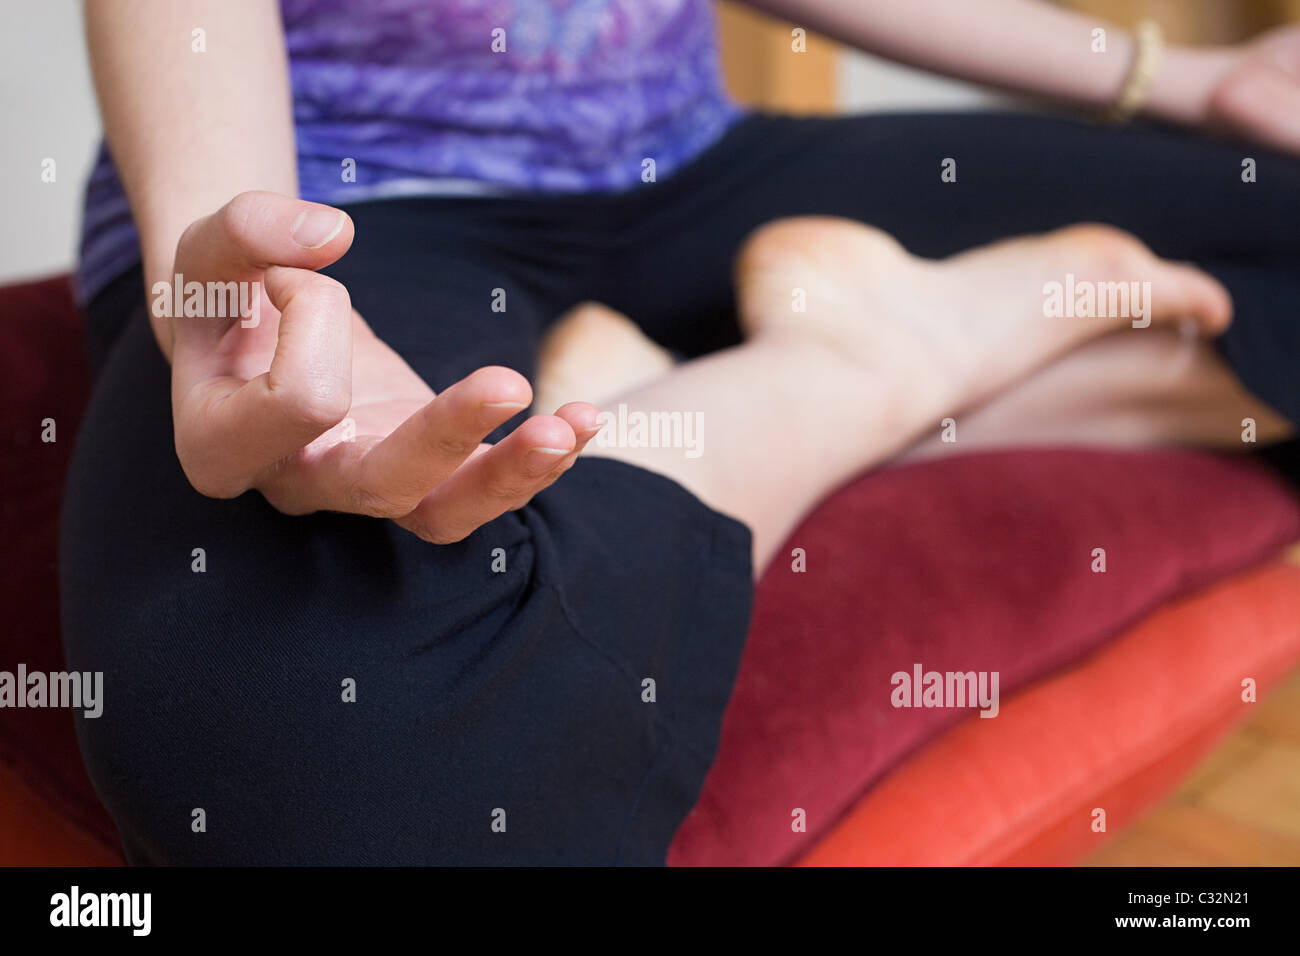 Women in lotus position during yoga Stock Photo